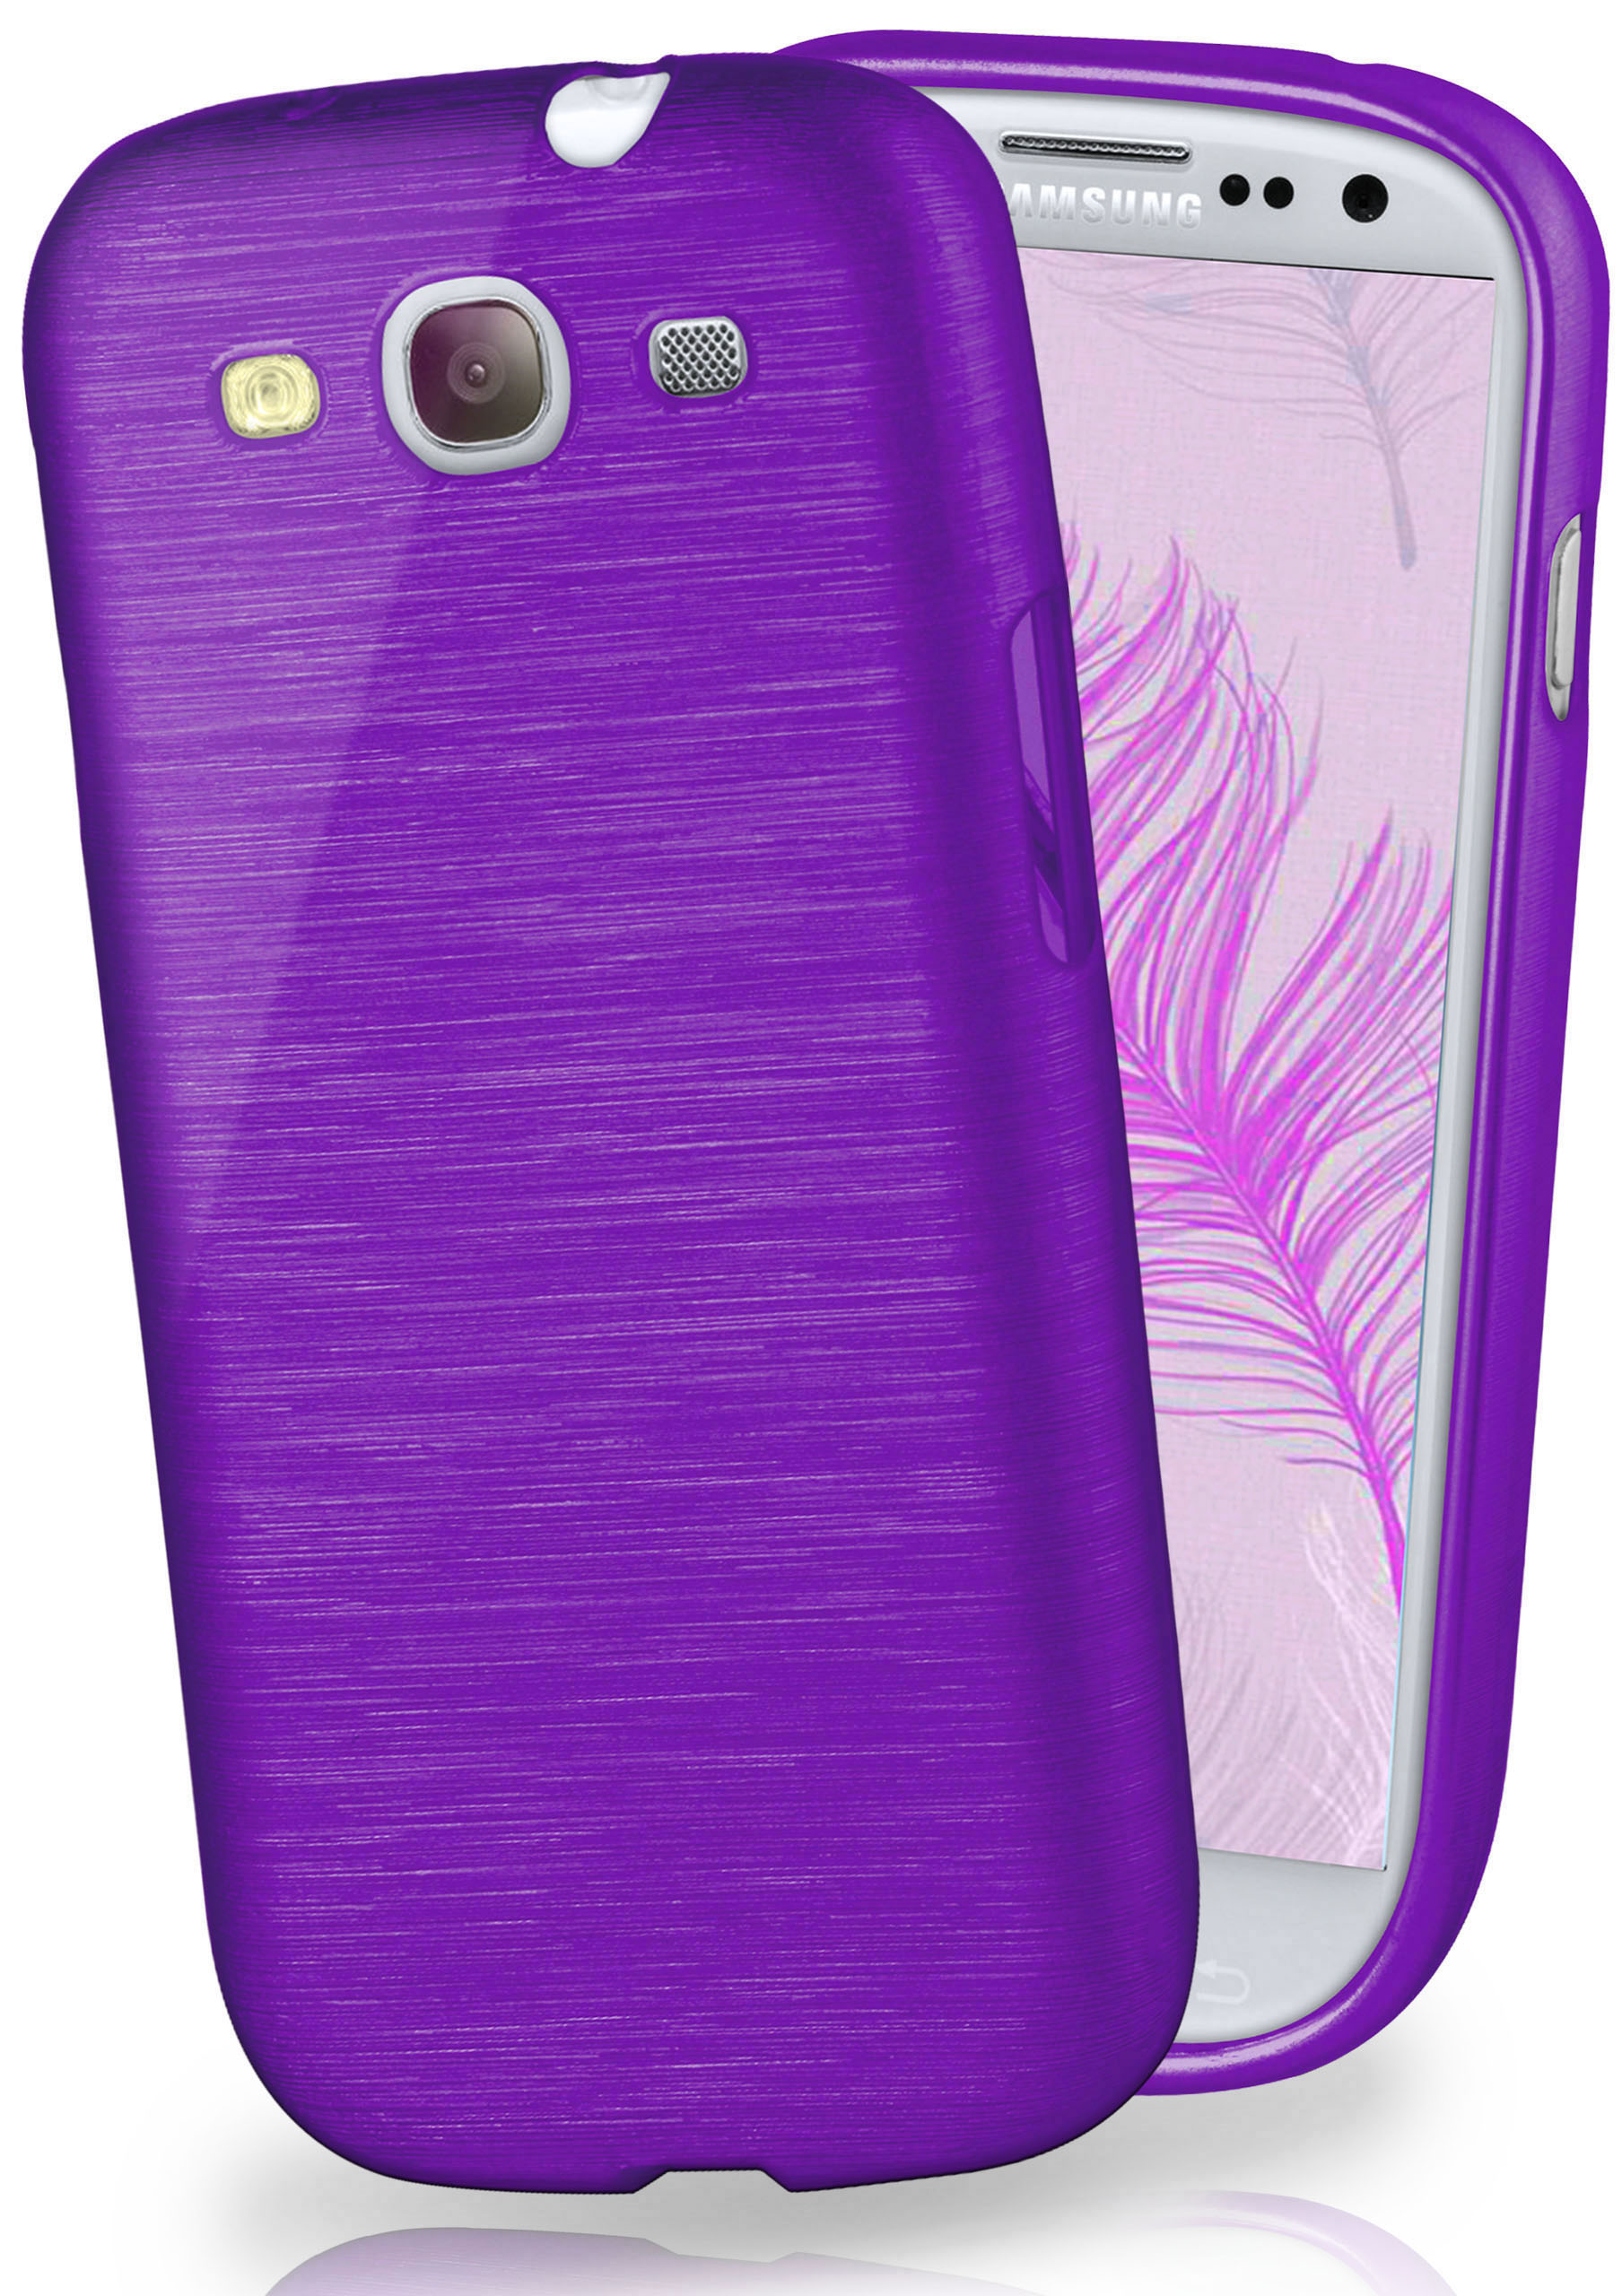 S3 / Backcover, Galaxy Neo, Samsung, MOEX S3 Purpure-Purple Brushed Case,